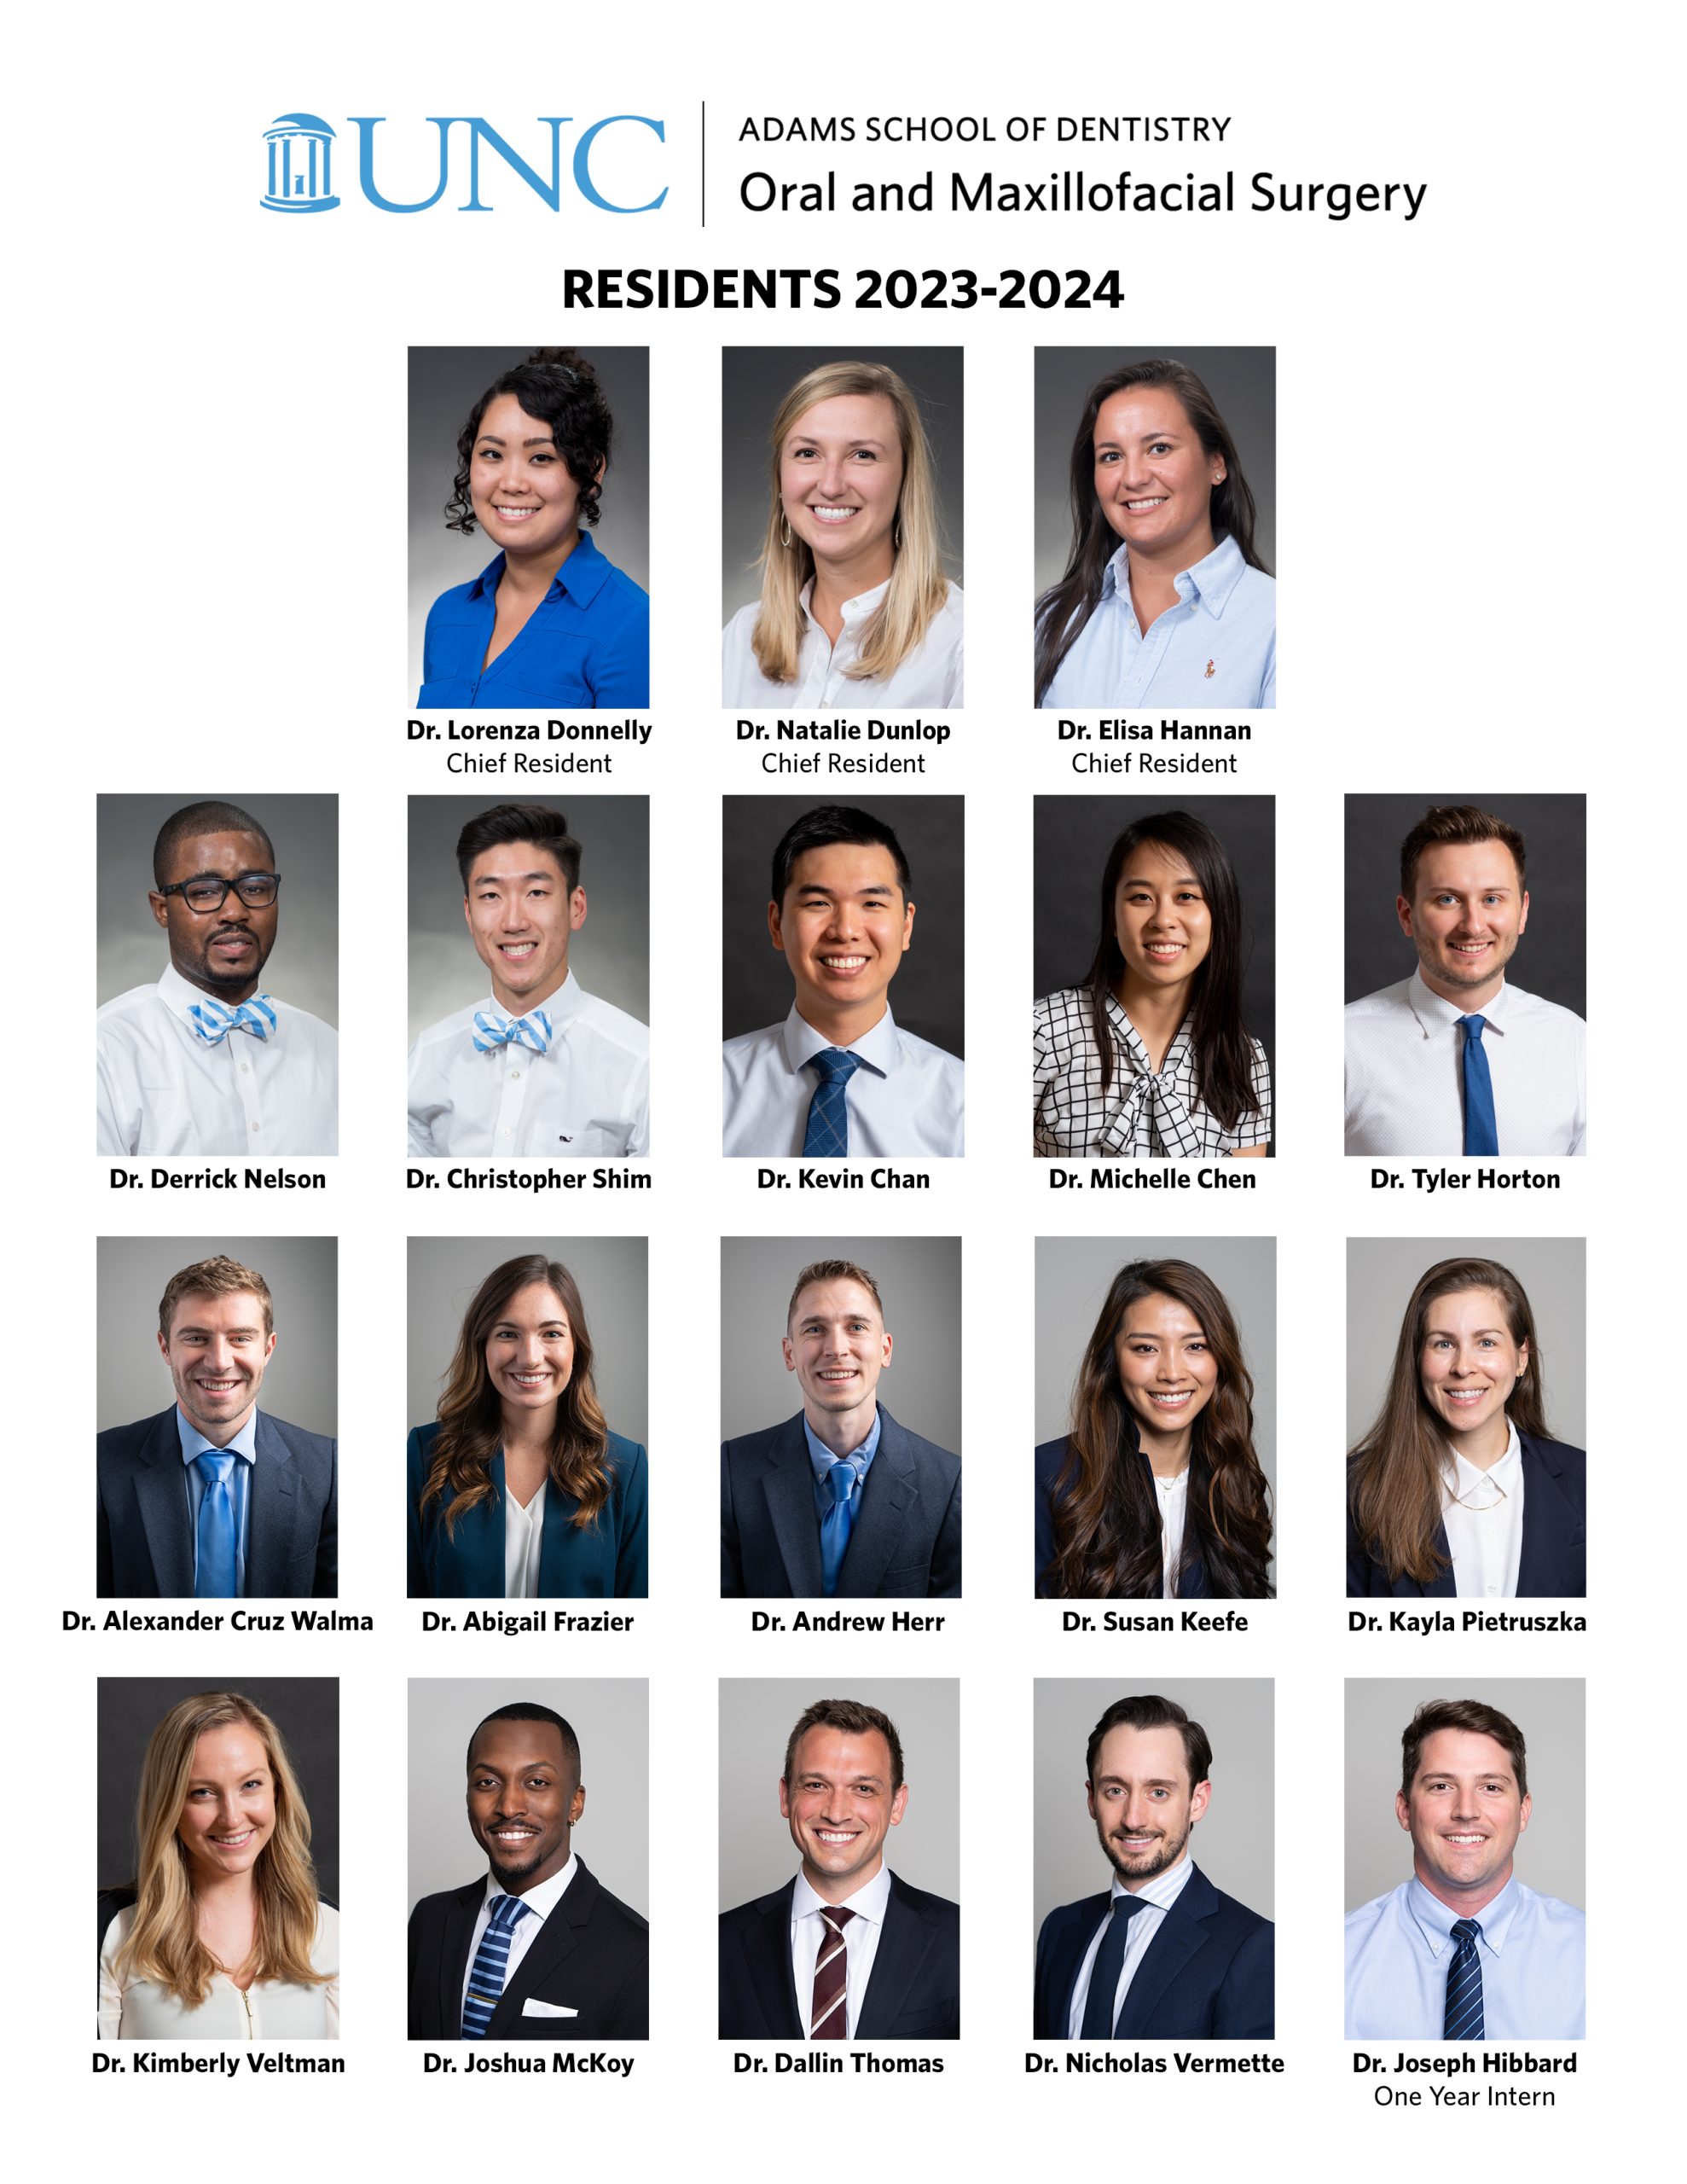 Headshots of the new OMFS residents